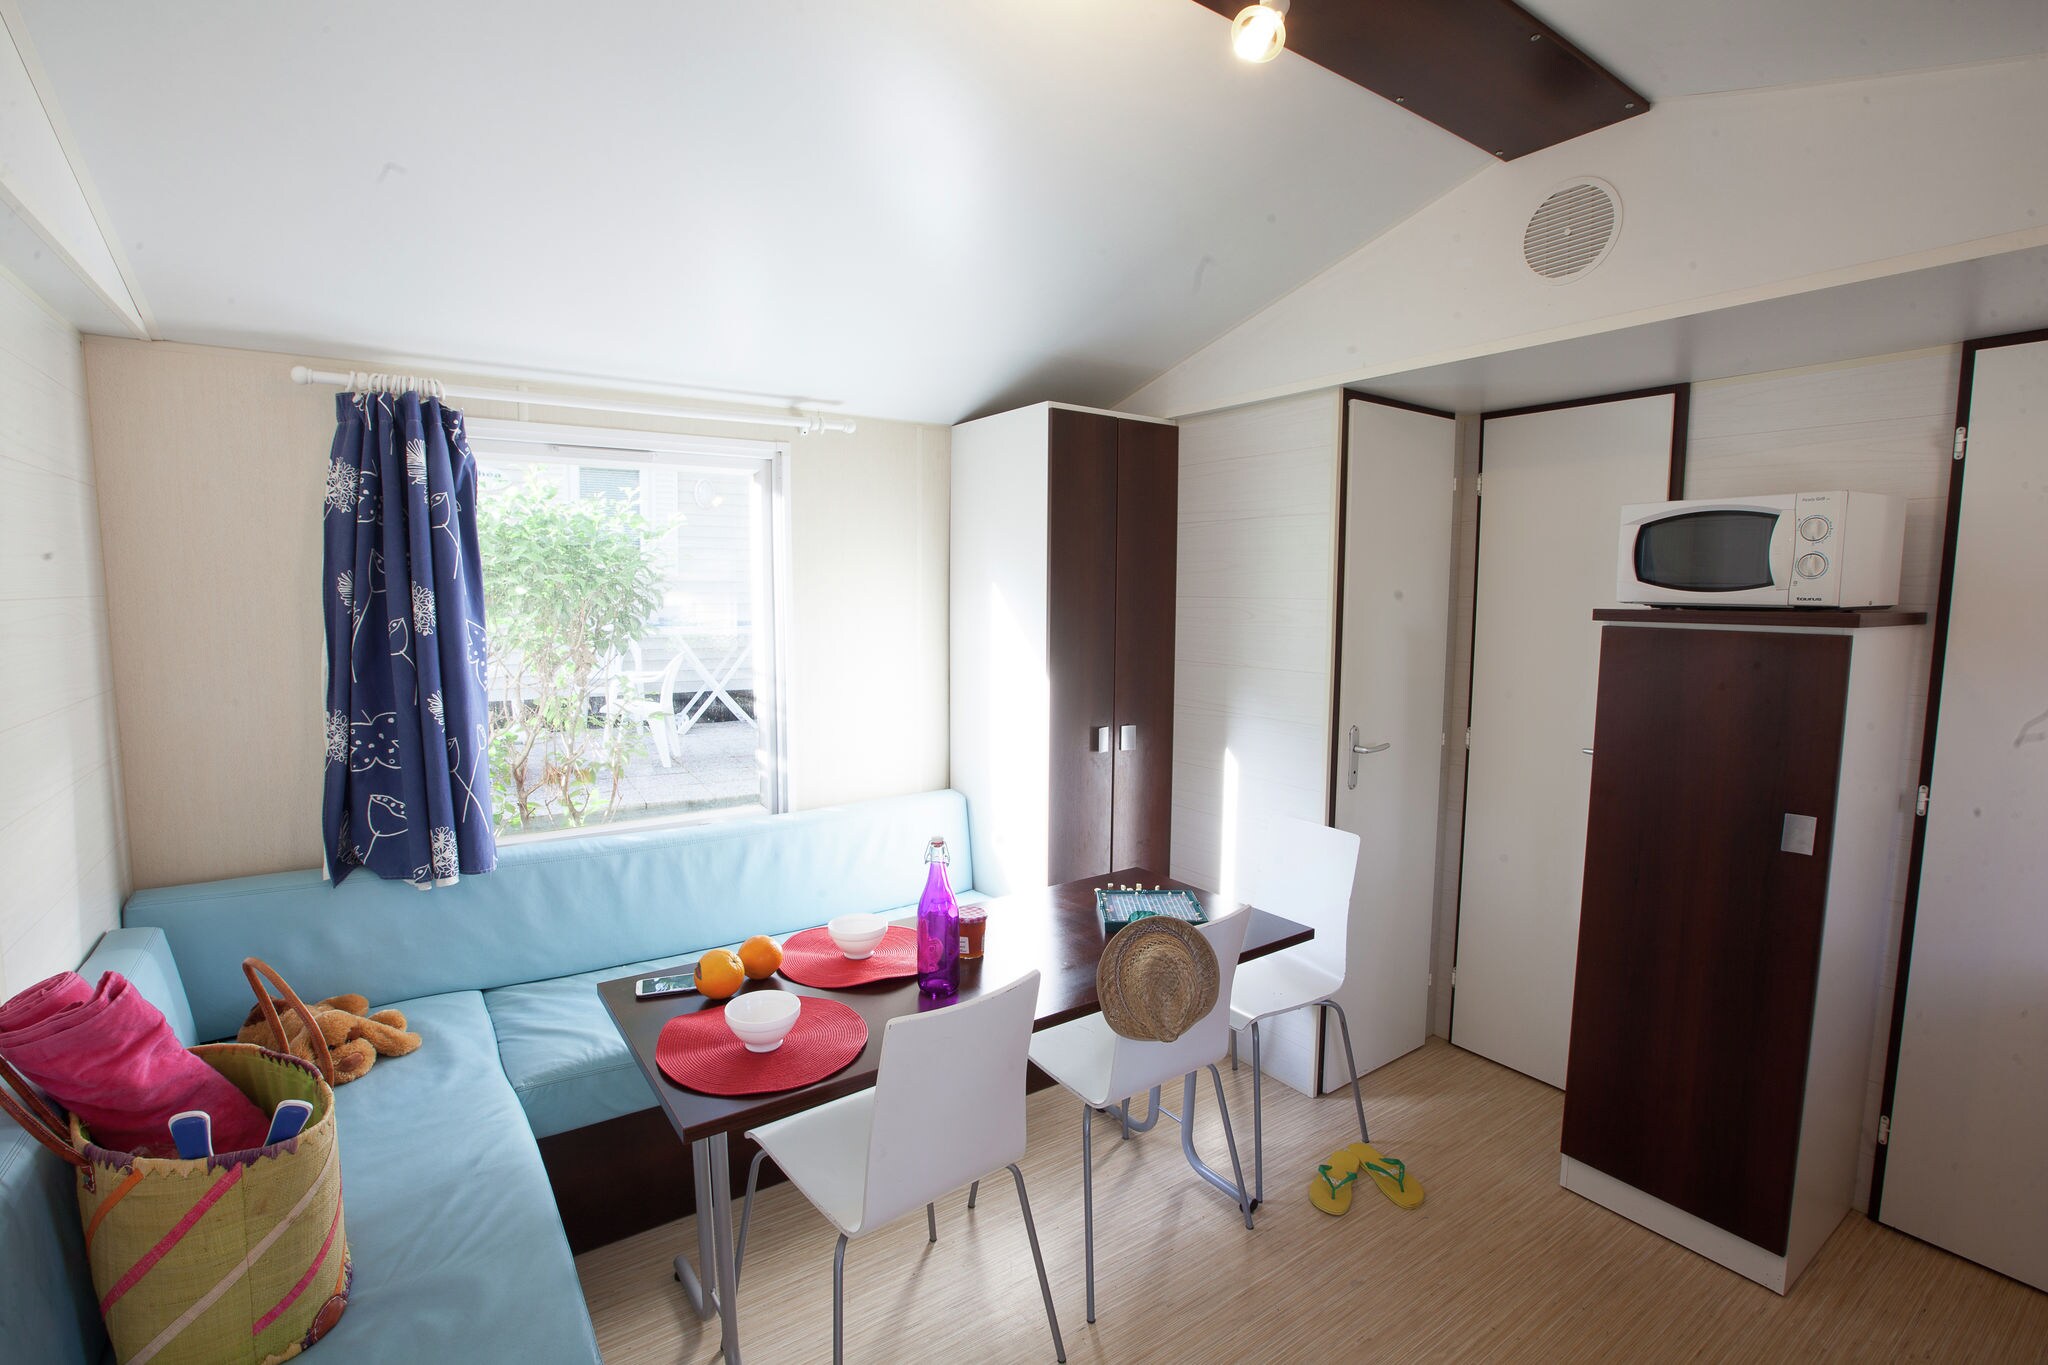 Well-kept mobilehome with combi-microwave, beach at 5 km.